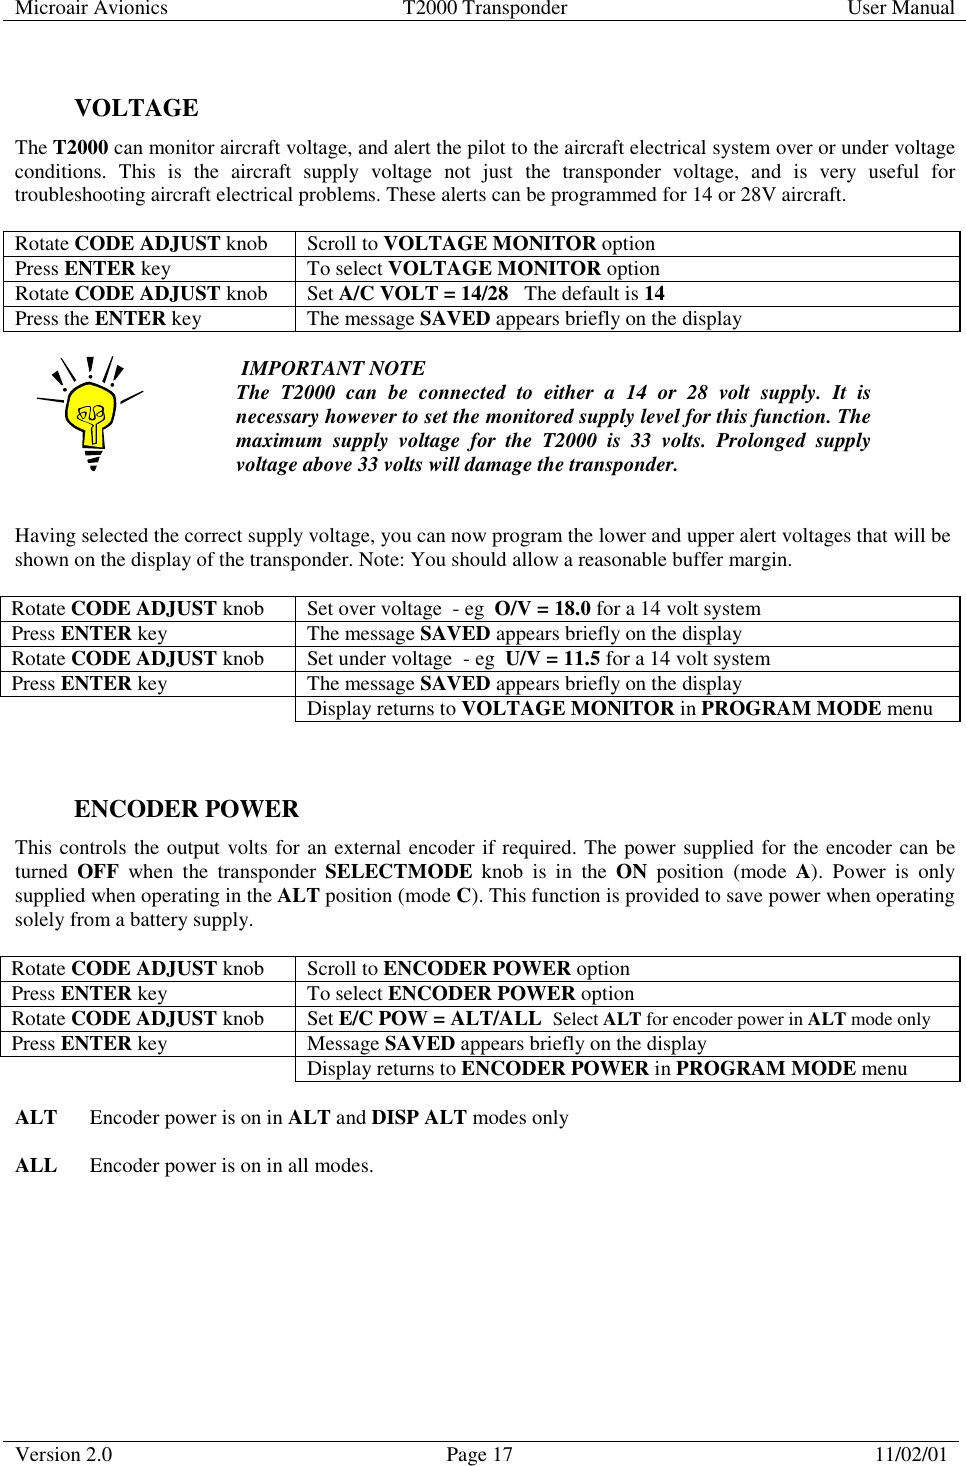 Microair Avionics  T2000 Transponder  User Manual  Version 2.0  Page 17  11/02/01      VOLTAGE  The T2000 can monitor aircraft voltage, and alert the pilot to the aircraft electrical system over or under voltage conditions. This is the aircraft supply voltage not just the transponder voltage, and is very useful for troubleshooting aircraft electrical problems. These alerts can be programmed for 14 or 28V aircraft.   Rotate CODE ADJUST knob  Scroll to VOLTAGE MONITOR option Press ENTER key  To select VOLTAGE MONITOR option Rotate CODE ADJUST knob Set A/C VOLT = 14/28   The default is 14 Press the ENTER key  The message SAVED appears briefly on the display    IMPORTANT NOTE The T2000 can be connected to either a 14 or 28 volt supply. It is necessary however to set the monitored supply level for this function. The maximum supply voltage for the T2000 is 33 volts. Prolonged supply voltage above 33 volts will damage the transponder.   Having selected the correct supply voltage, you can now program the lower and upper alert voltages that will be shown on the display of the transponder. Note: You should allow a reasonable buffer margin.   Rotate CODE ADJUST knob  Set over voltage  - eg  O/V = 18.0 for a 14 volt system Press ENTER key  The message SAVED appears briefly on the display Rotate CODE ADJUST knob  Set under voltage  - eg  U/V = 11.5 for a 14 volt system Press ENTER key  The message SAVED appears briefly on the display   Display returns to VOLTAGE MONITOR in PROGRAM MODE menu   ENCODER POWER This controls the output volts for an external encoder if required. The power supplied for the encoder can be turned  OFF when the transponder SELECTMODE knob is in the ON position (mode A). Power is only supplied when operating in the ALT position (mode C). This function is provided to save power when operating solely from a battery supply.  Rotate CODE ADJUST knob  Scroll to ENCODER POWER option Press ENTER key  To select ENCODER POWER option Rotate CODE ADJUST knob Set E/C POW = ALT/ALL  Select ALT for encoder power in ALT mode only Press ENTER key  Message SAVED appears briefly on the display   Display returns to ENCODER POWER in PROGRAM MODE menu  ALT  Encoder power is on in ALT and DISP ALT modes only  ALL  Encoder power is on in all modes.